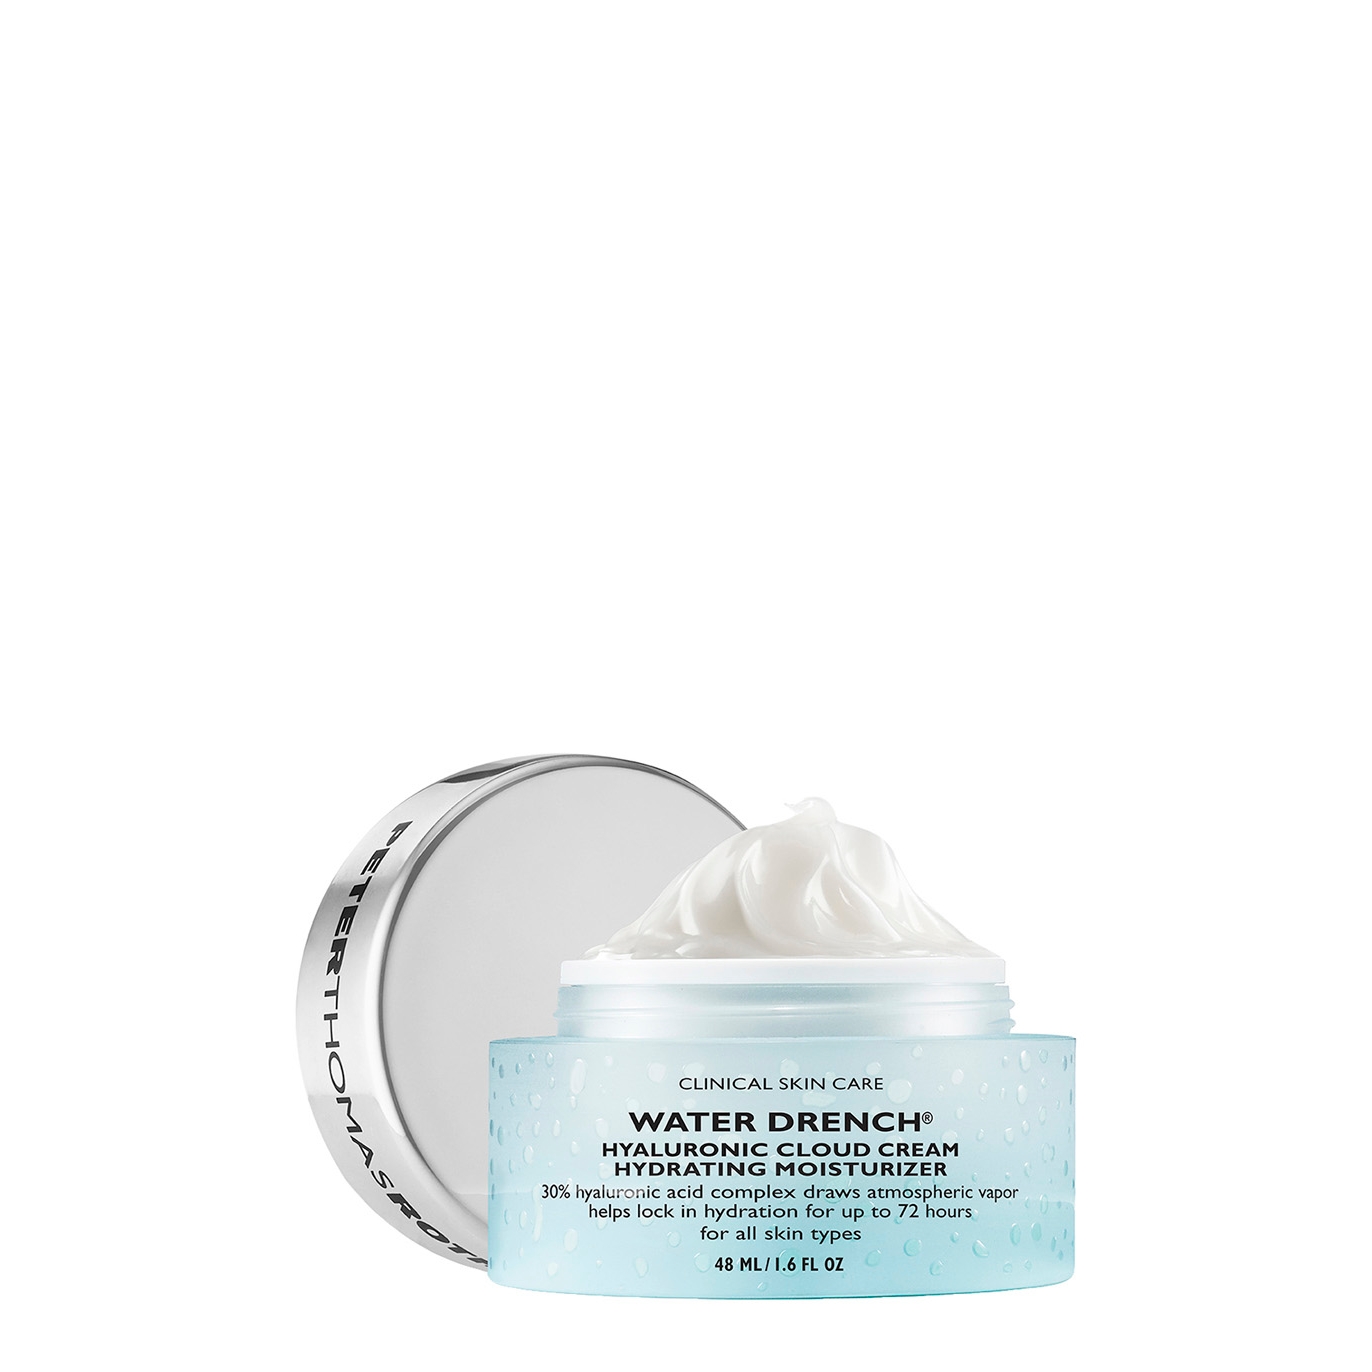 Peter Thomas Roth Water Drench Cloud Cream 48ml